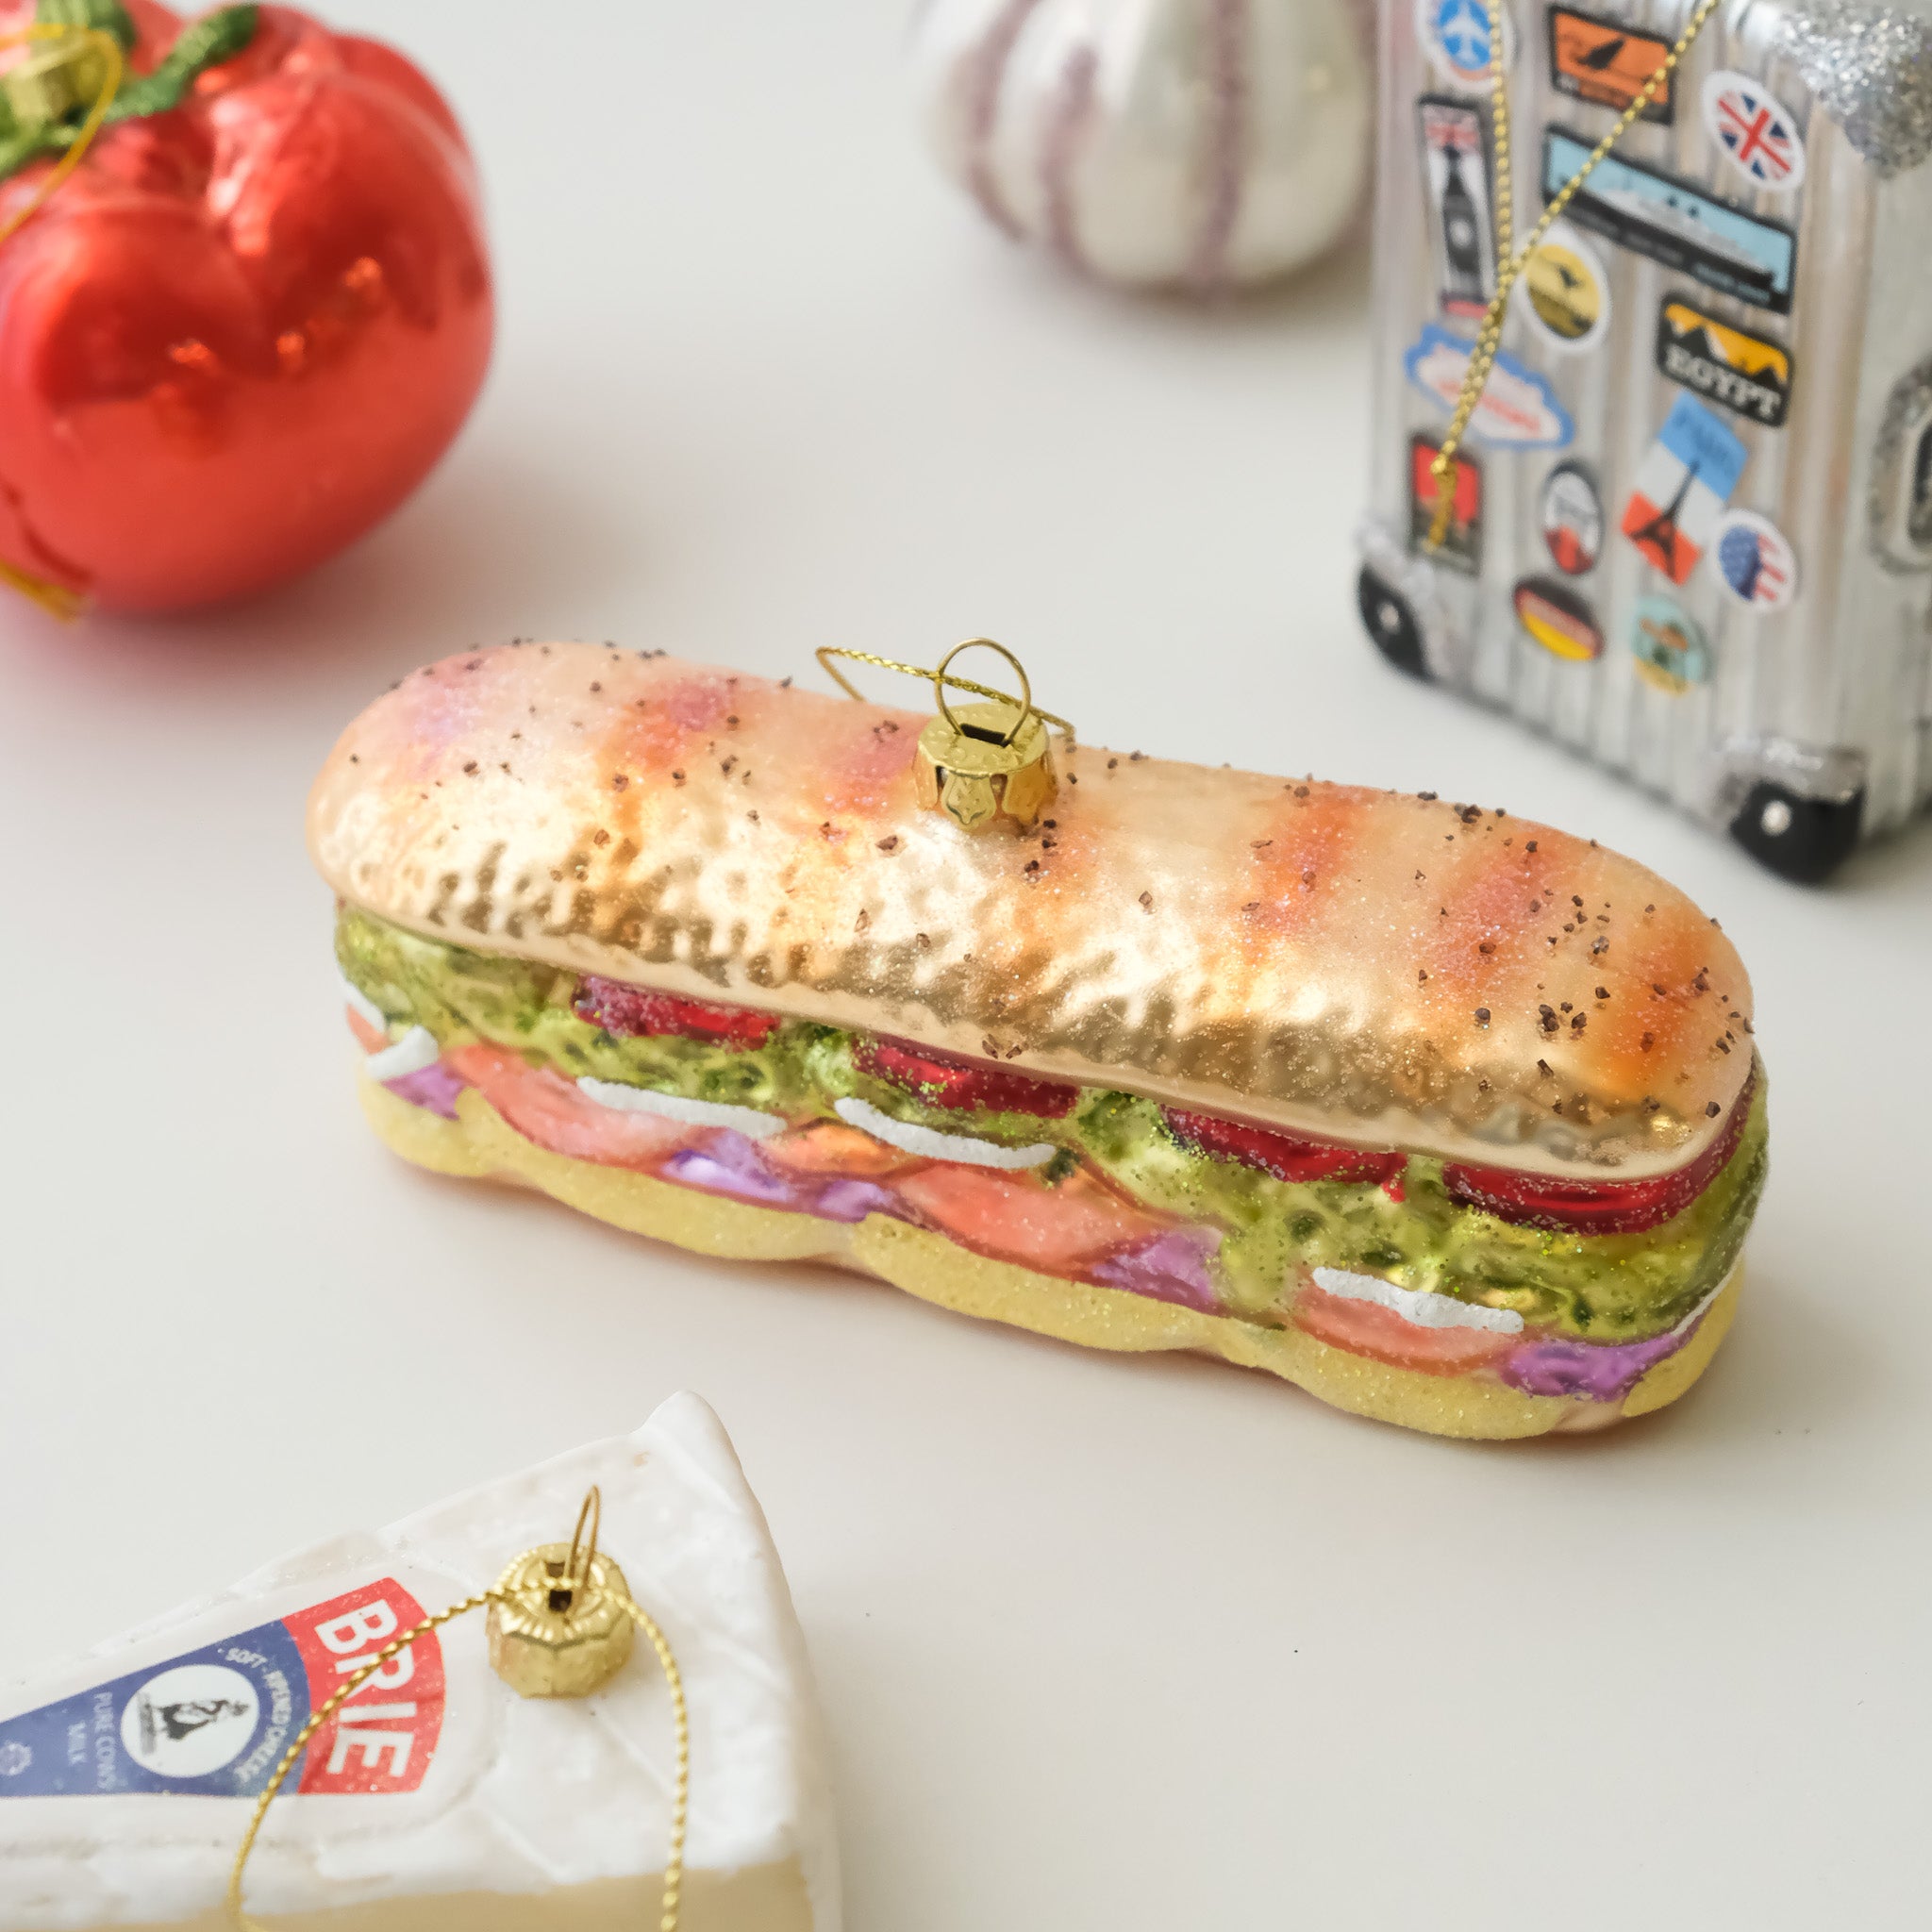 Vintage Heirloom Ornament - Deluxe Sub Sandwich